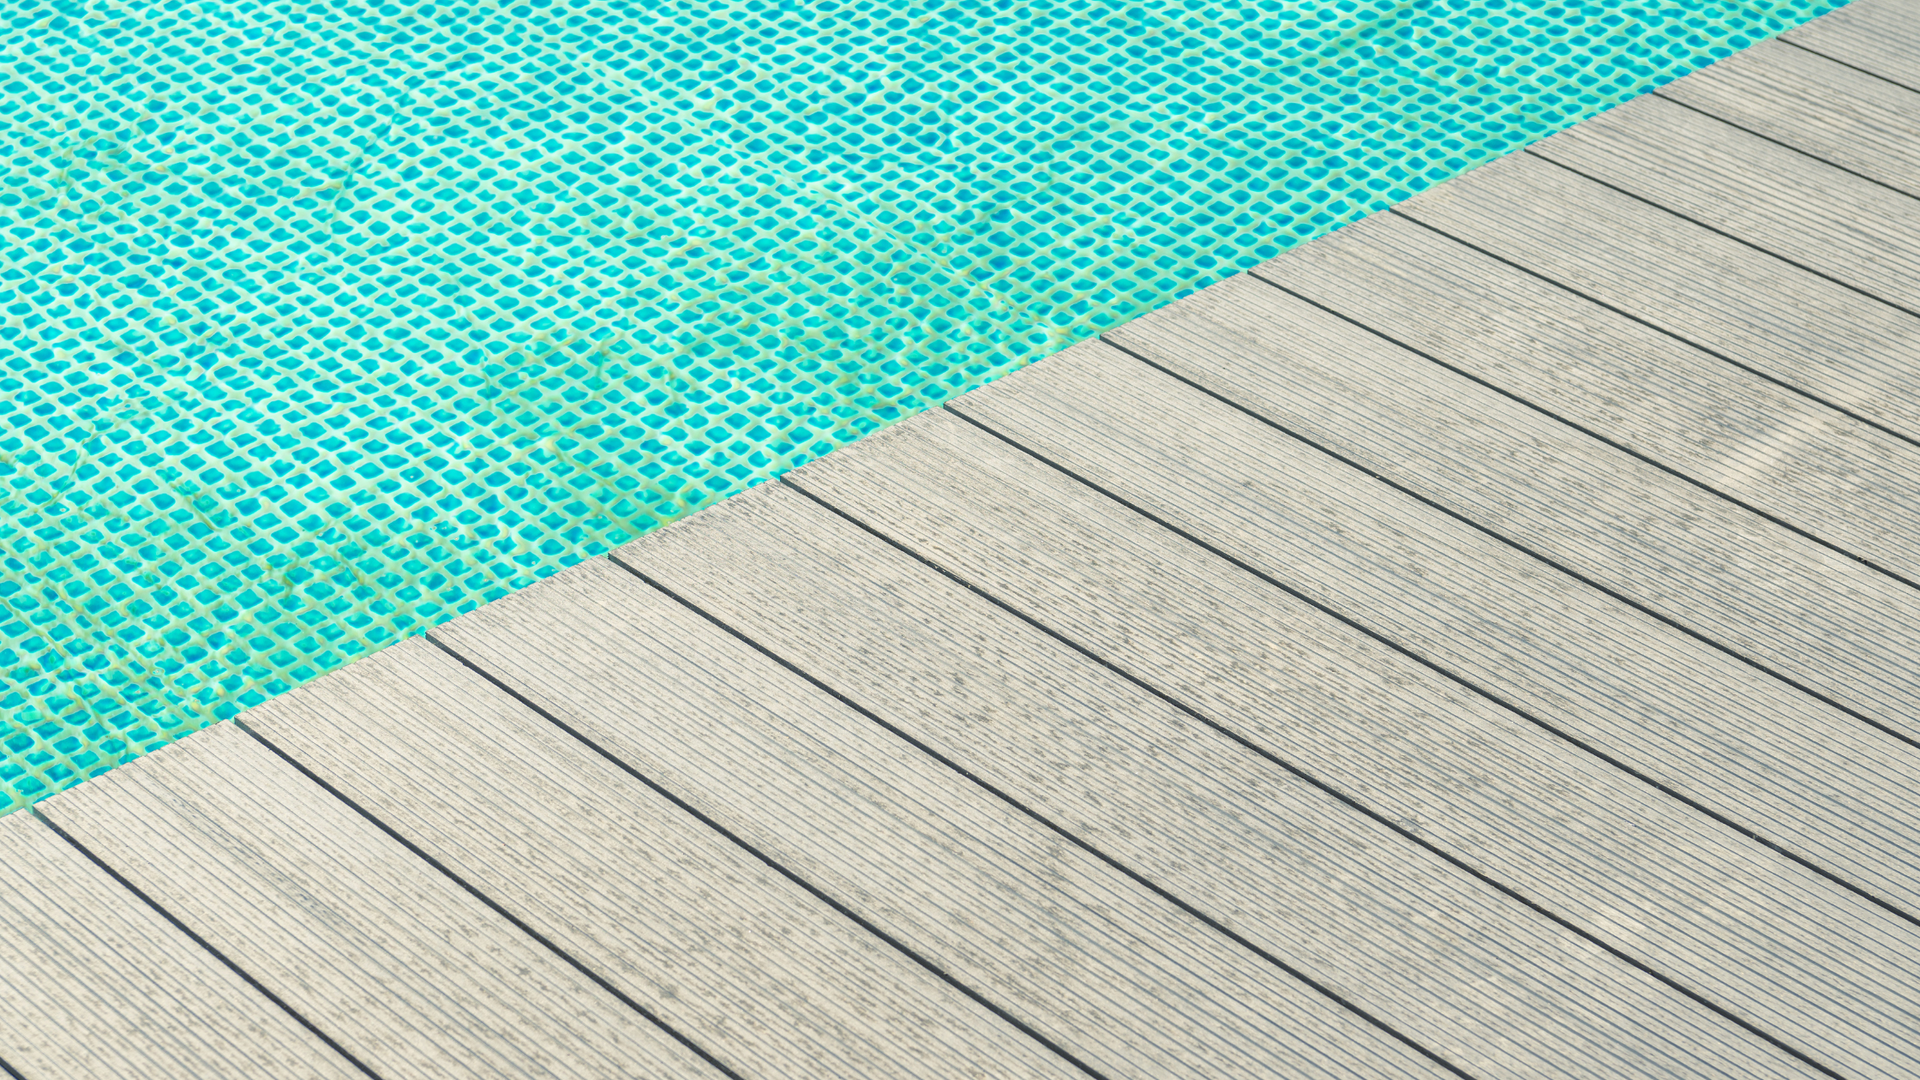 Composite deck featuring a stunning wood pattern, ideal for enhancing outdoor living spaces